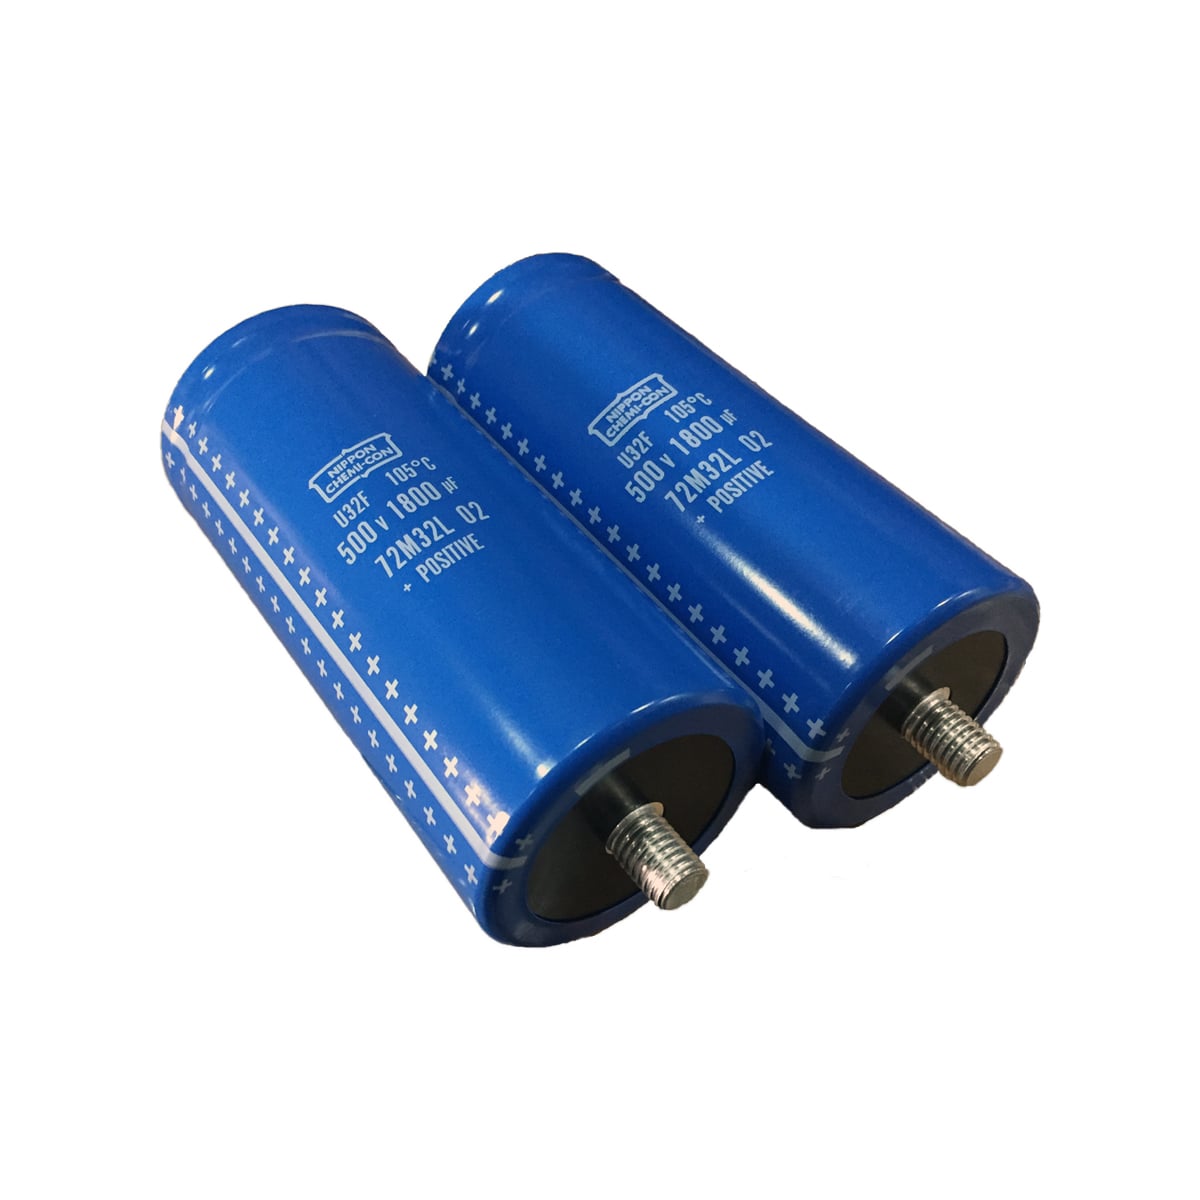 STAND-OFF CAPACITOR. Part: 216861